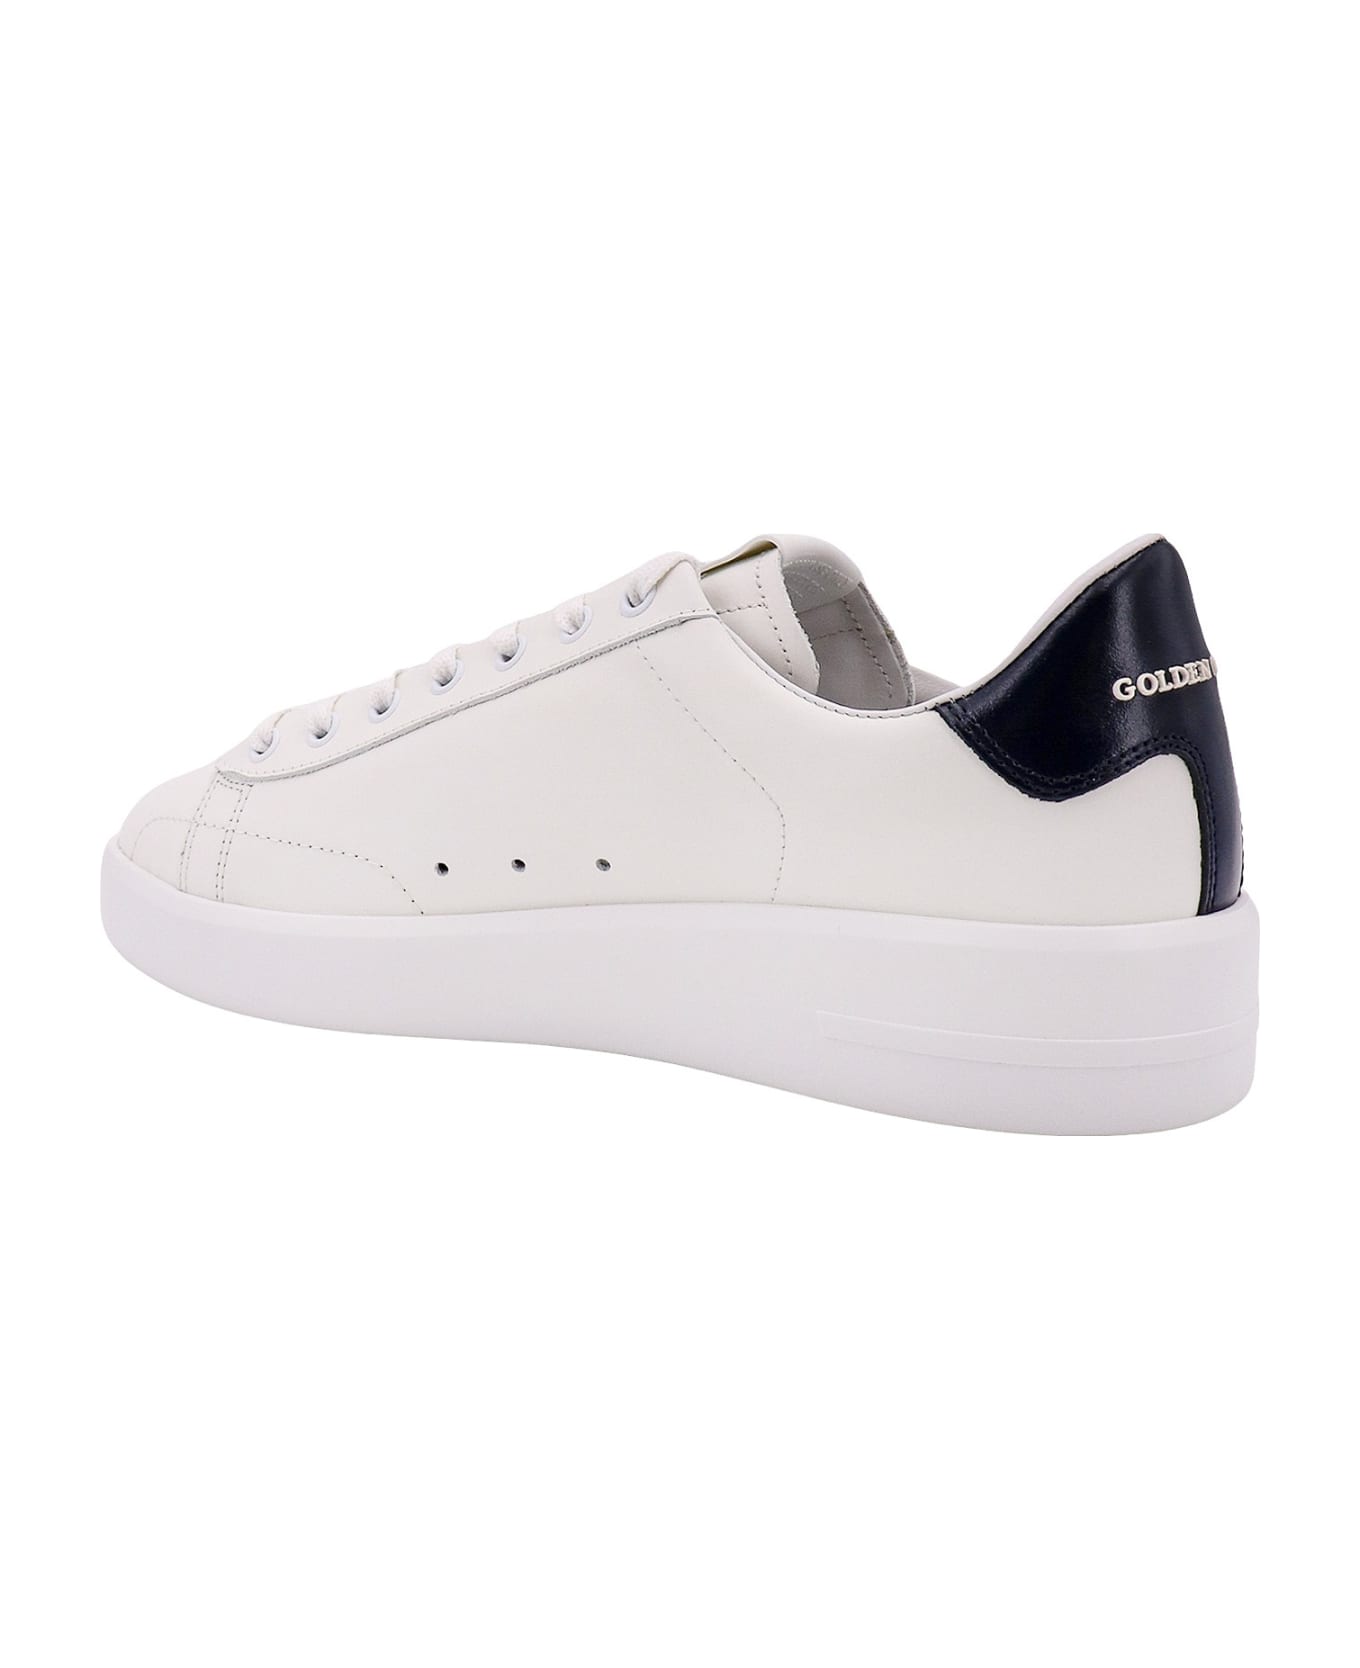 Golden Goose Pure New Sneakers - WHITE/BLUE   スニーカー